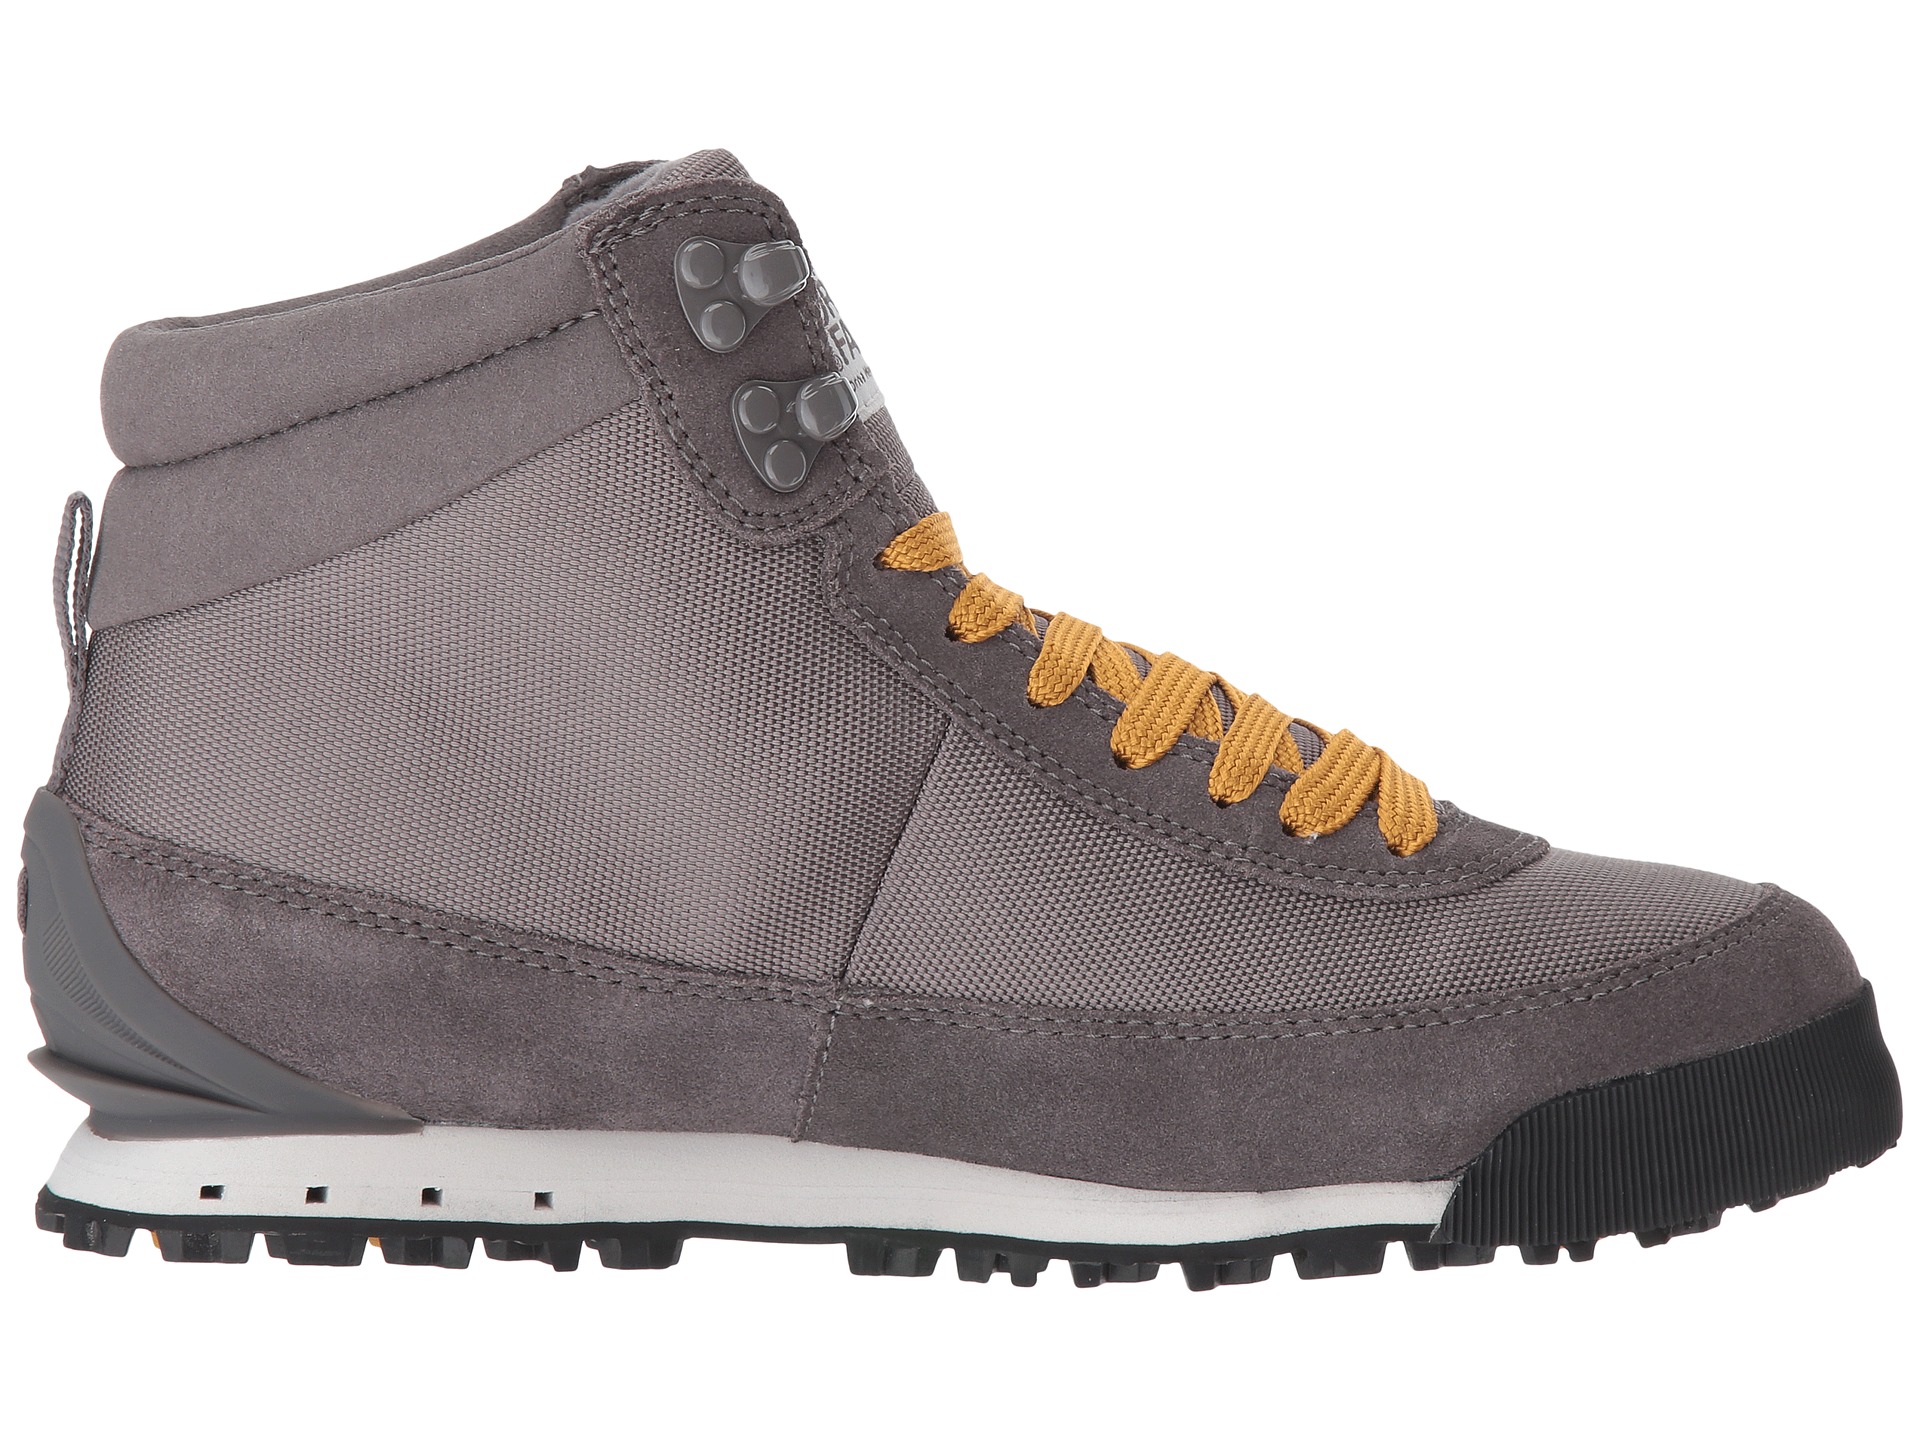 The North Face Back-To-Berkeley Boot II at Zappos.com